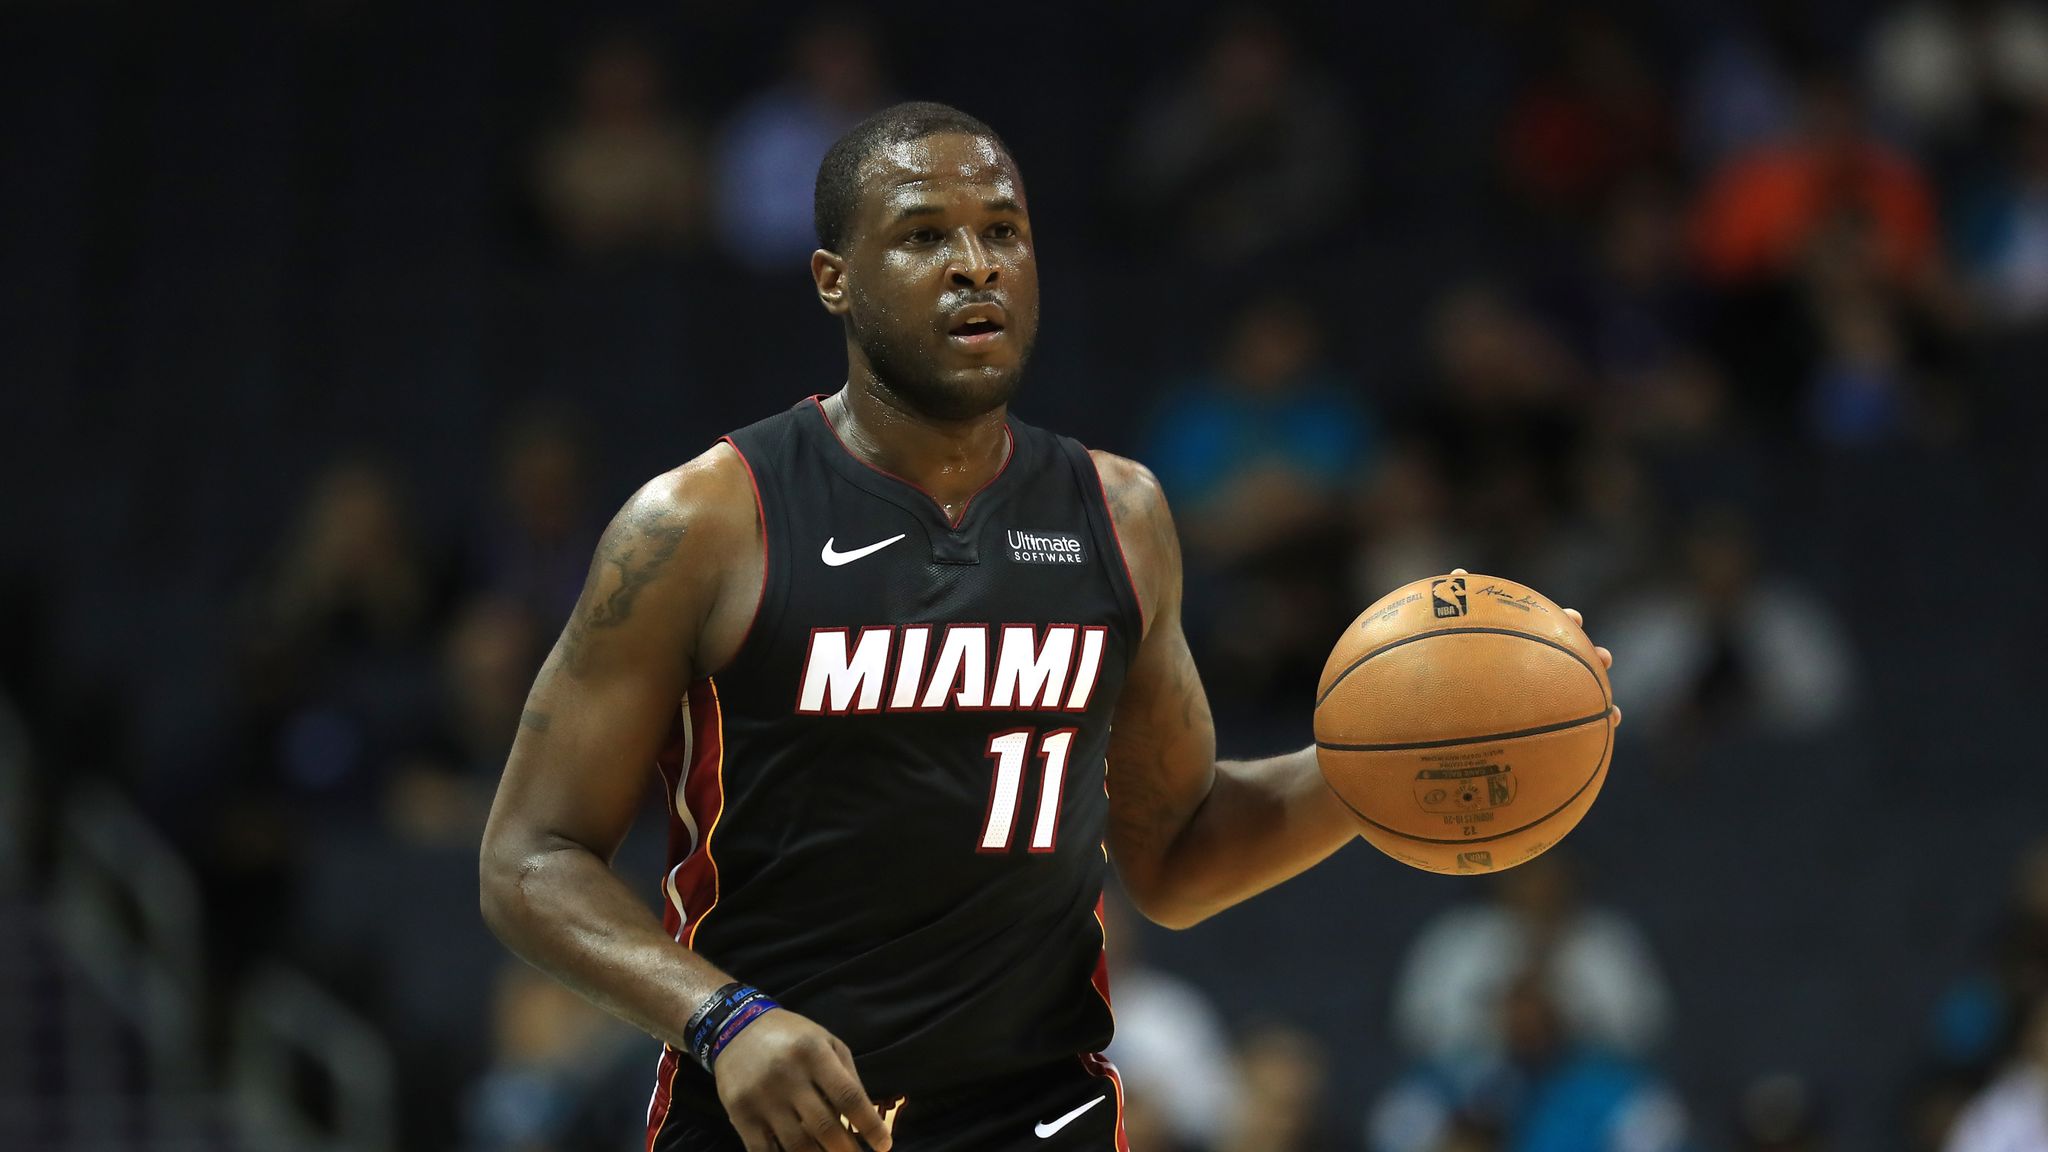 NBA News Could Golden State Warriors Reunite with Old Favorites Top 5 Players Warriors Could Target in the Free Agency Trade - Dion Waiters